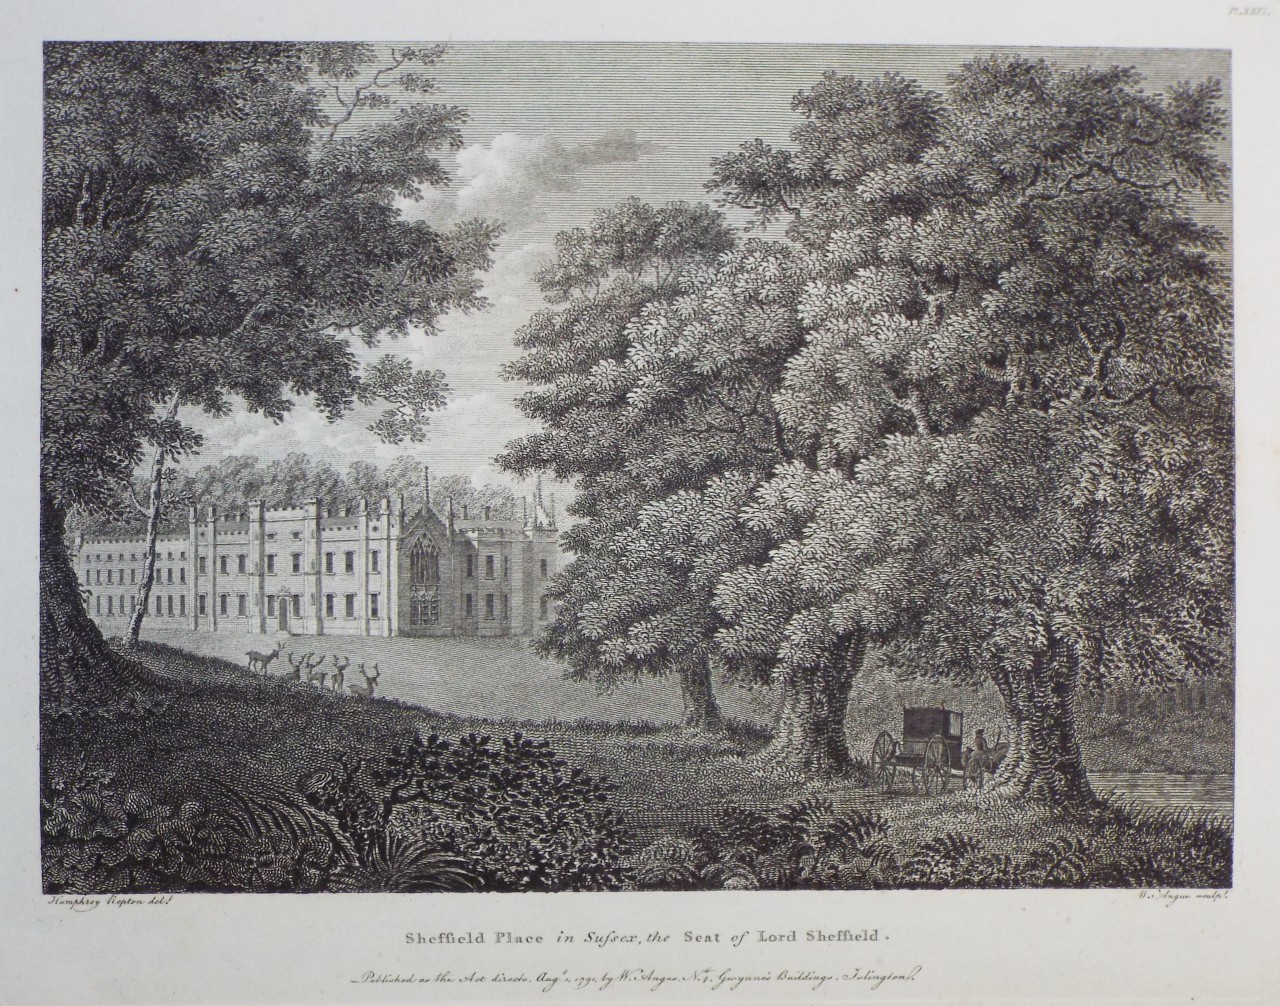 Print - Sheffield Place in Sussex, the Seat of Lord Sheffield. - Angus